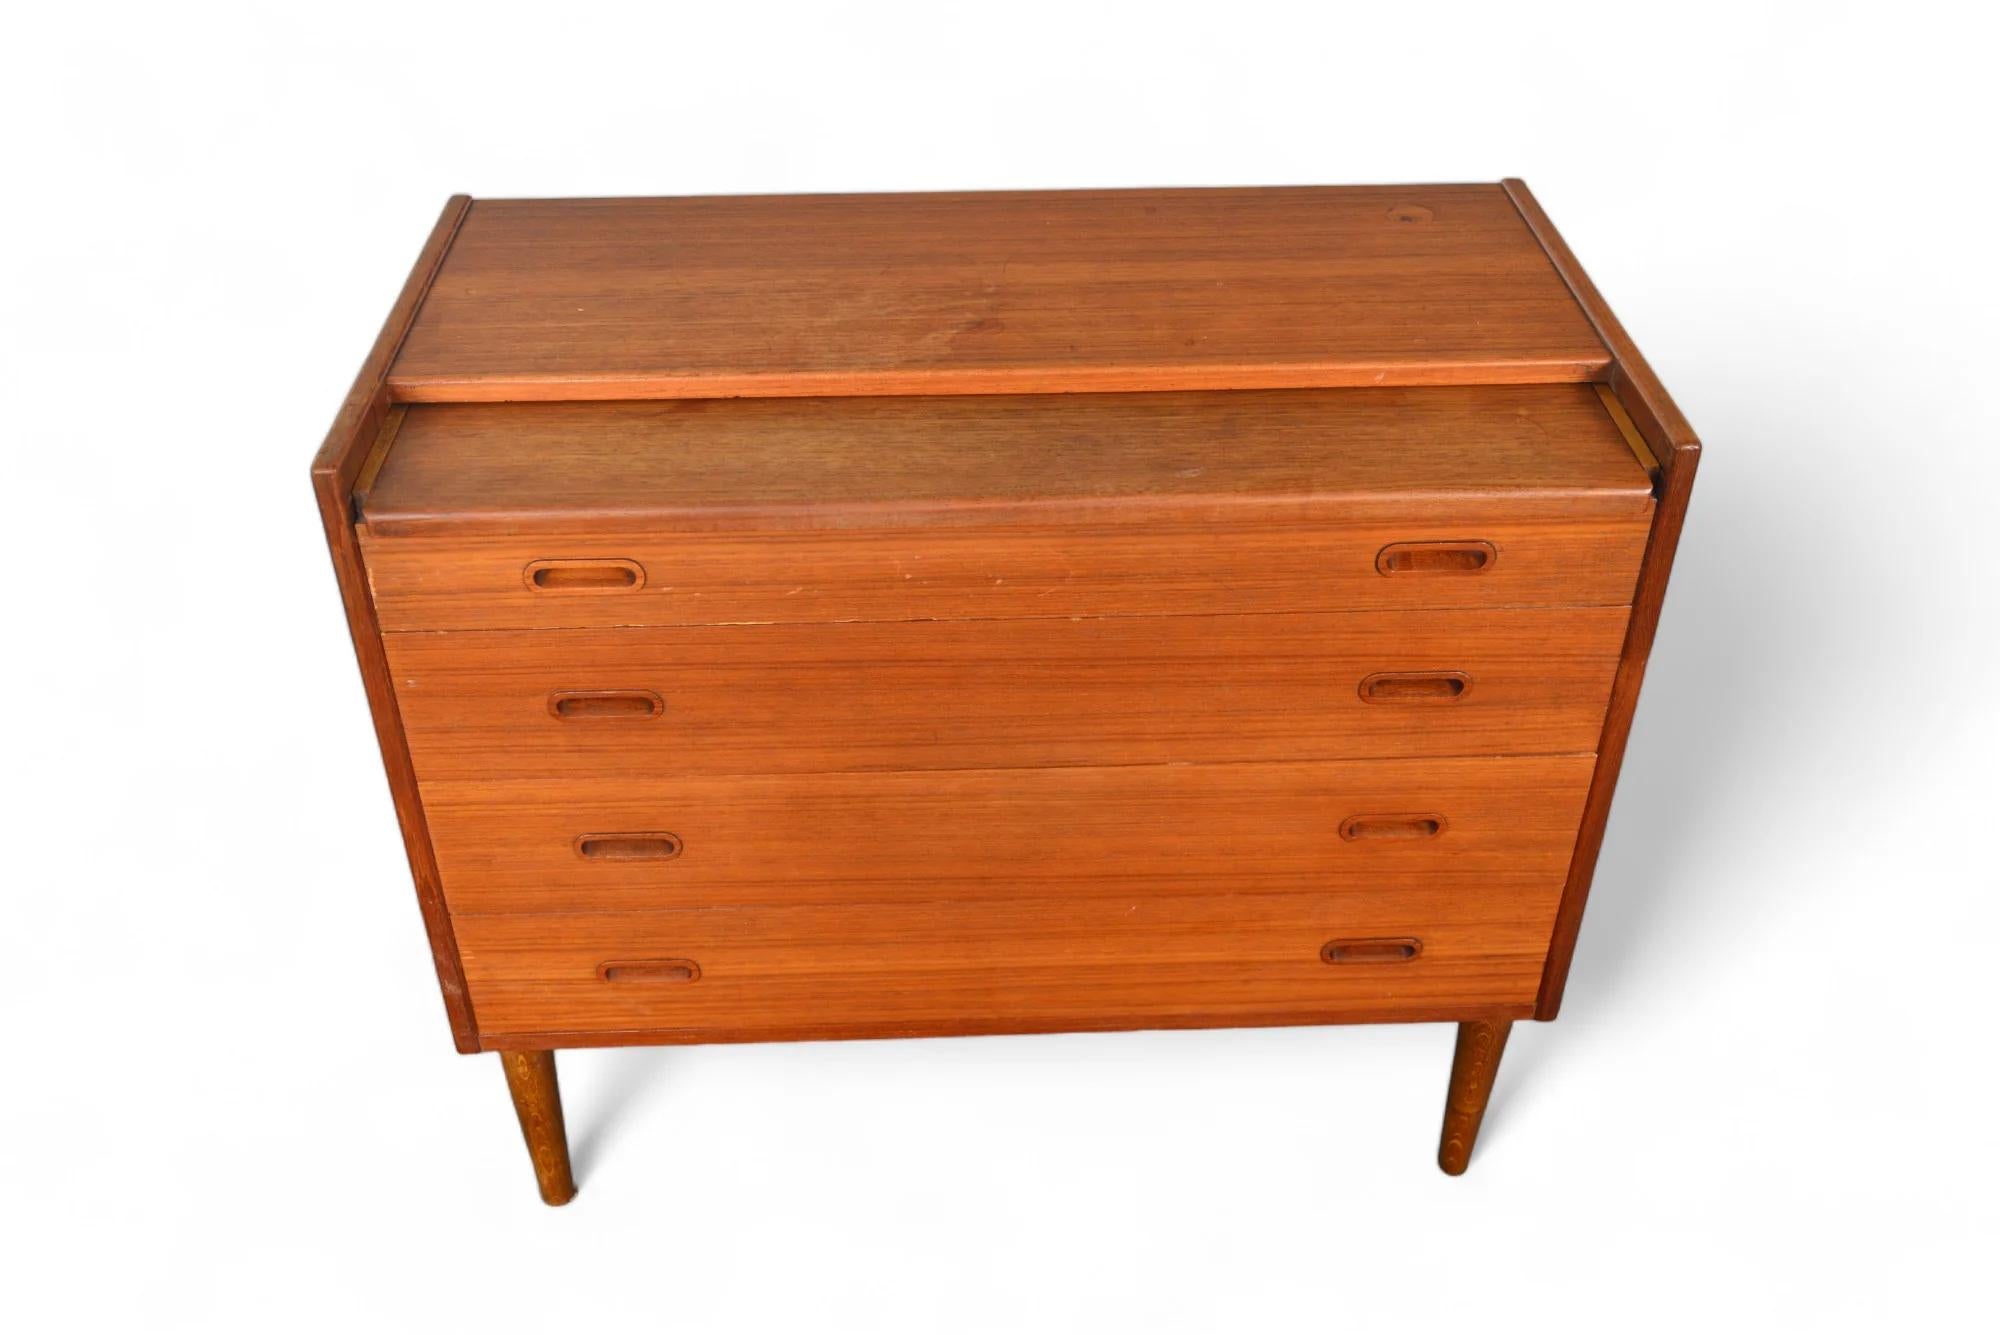 Designed by Arne Vodder in the 1960s, this Danish modern teak secretary is bursting with functionality! Top drawer pulls out to create a desk and when the top plate is lifted, a vanity mirror and divided makeup compartments are revealed. Three lower